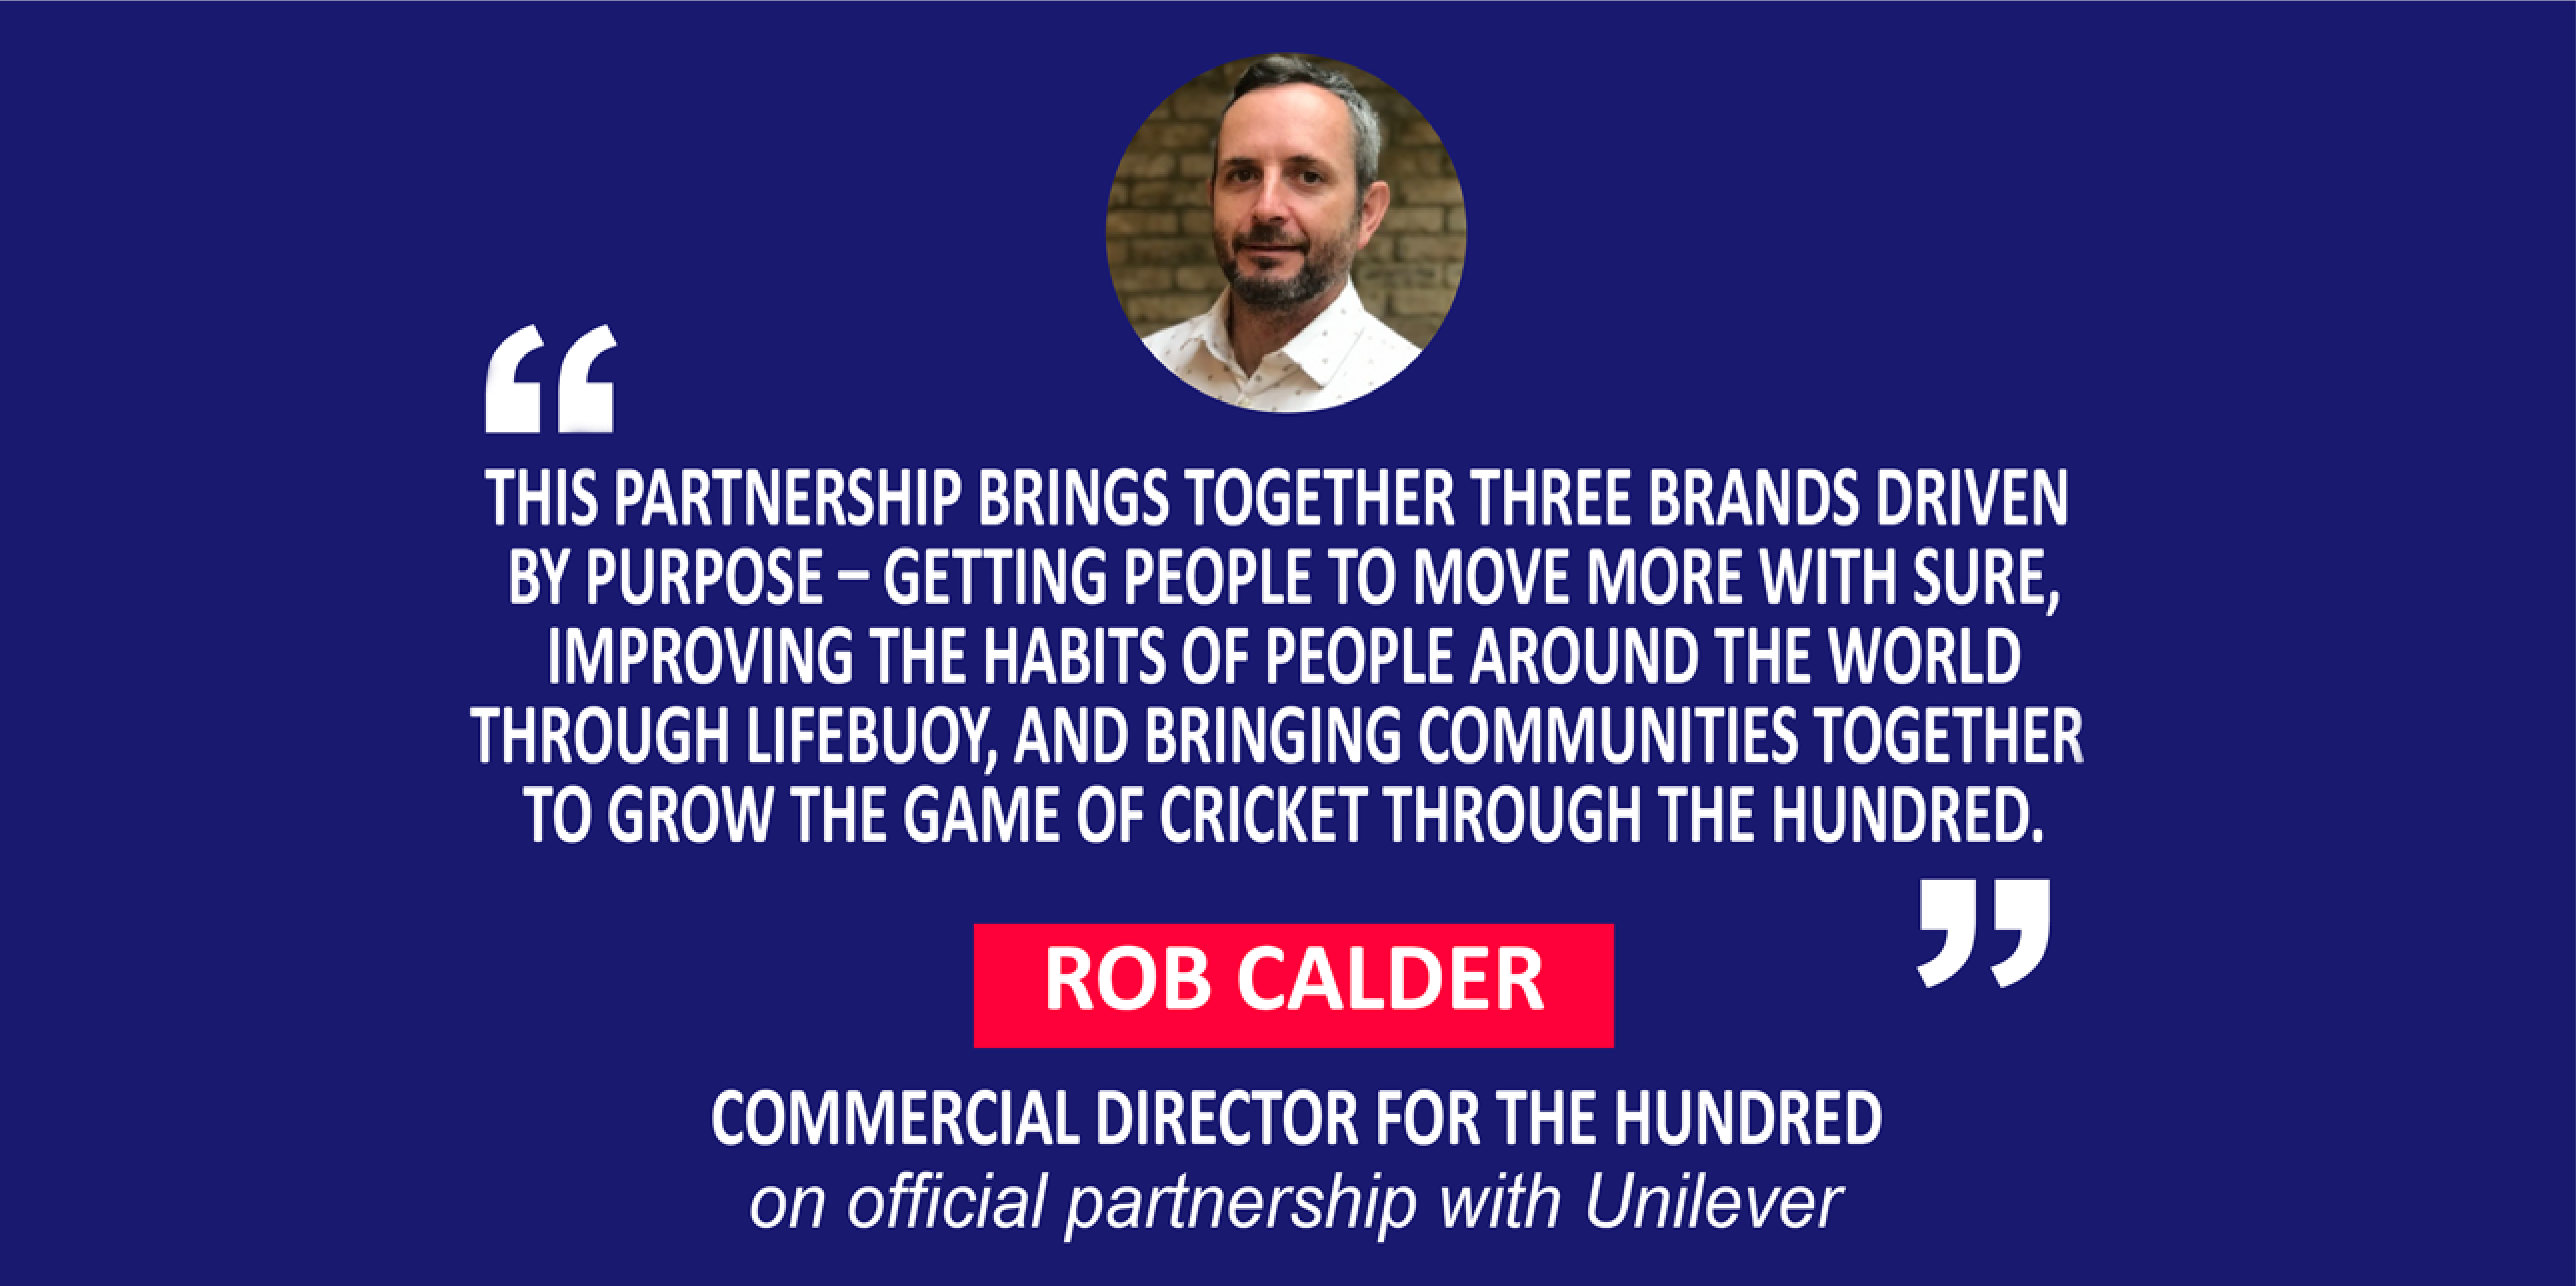 Rob Calder, Commercial Director for The Hundred on official partnership with Unilever